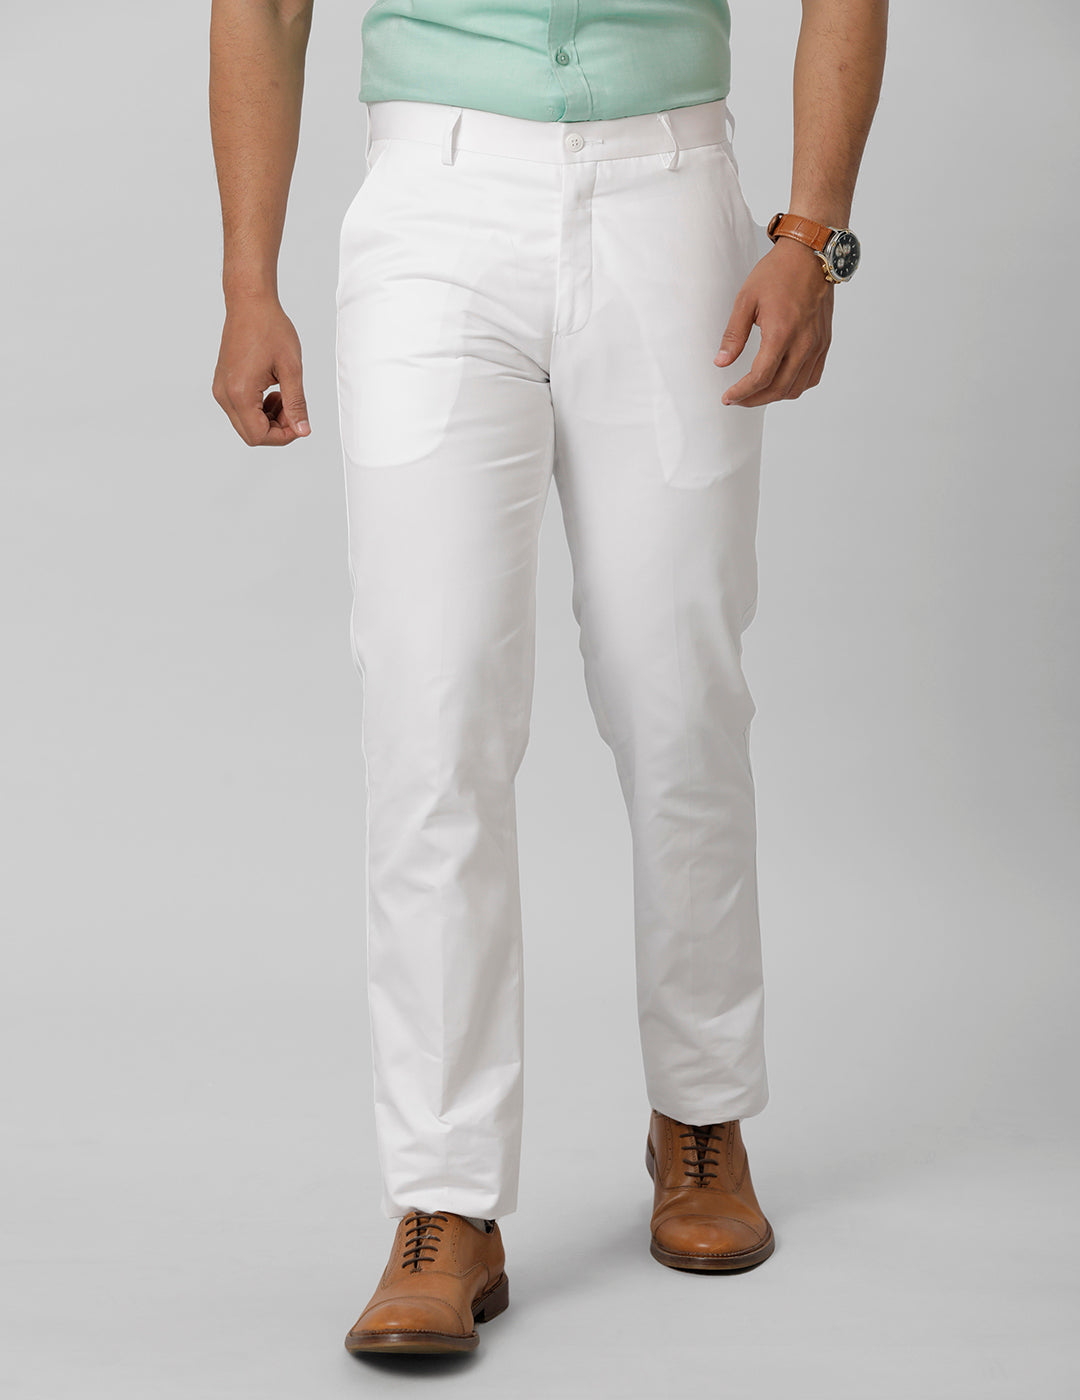 Buy Cotton White Pant Online at Best Prices in India